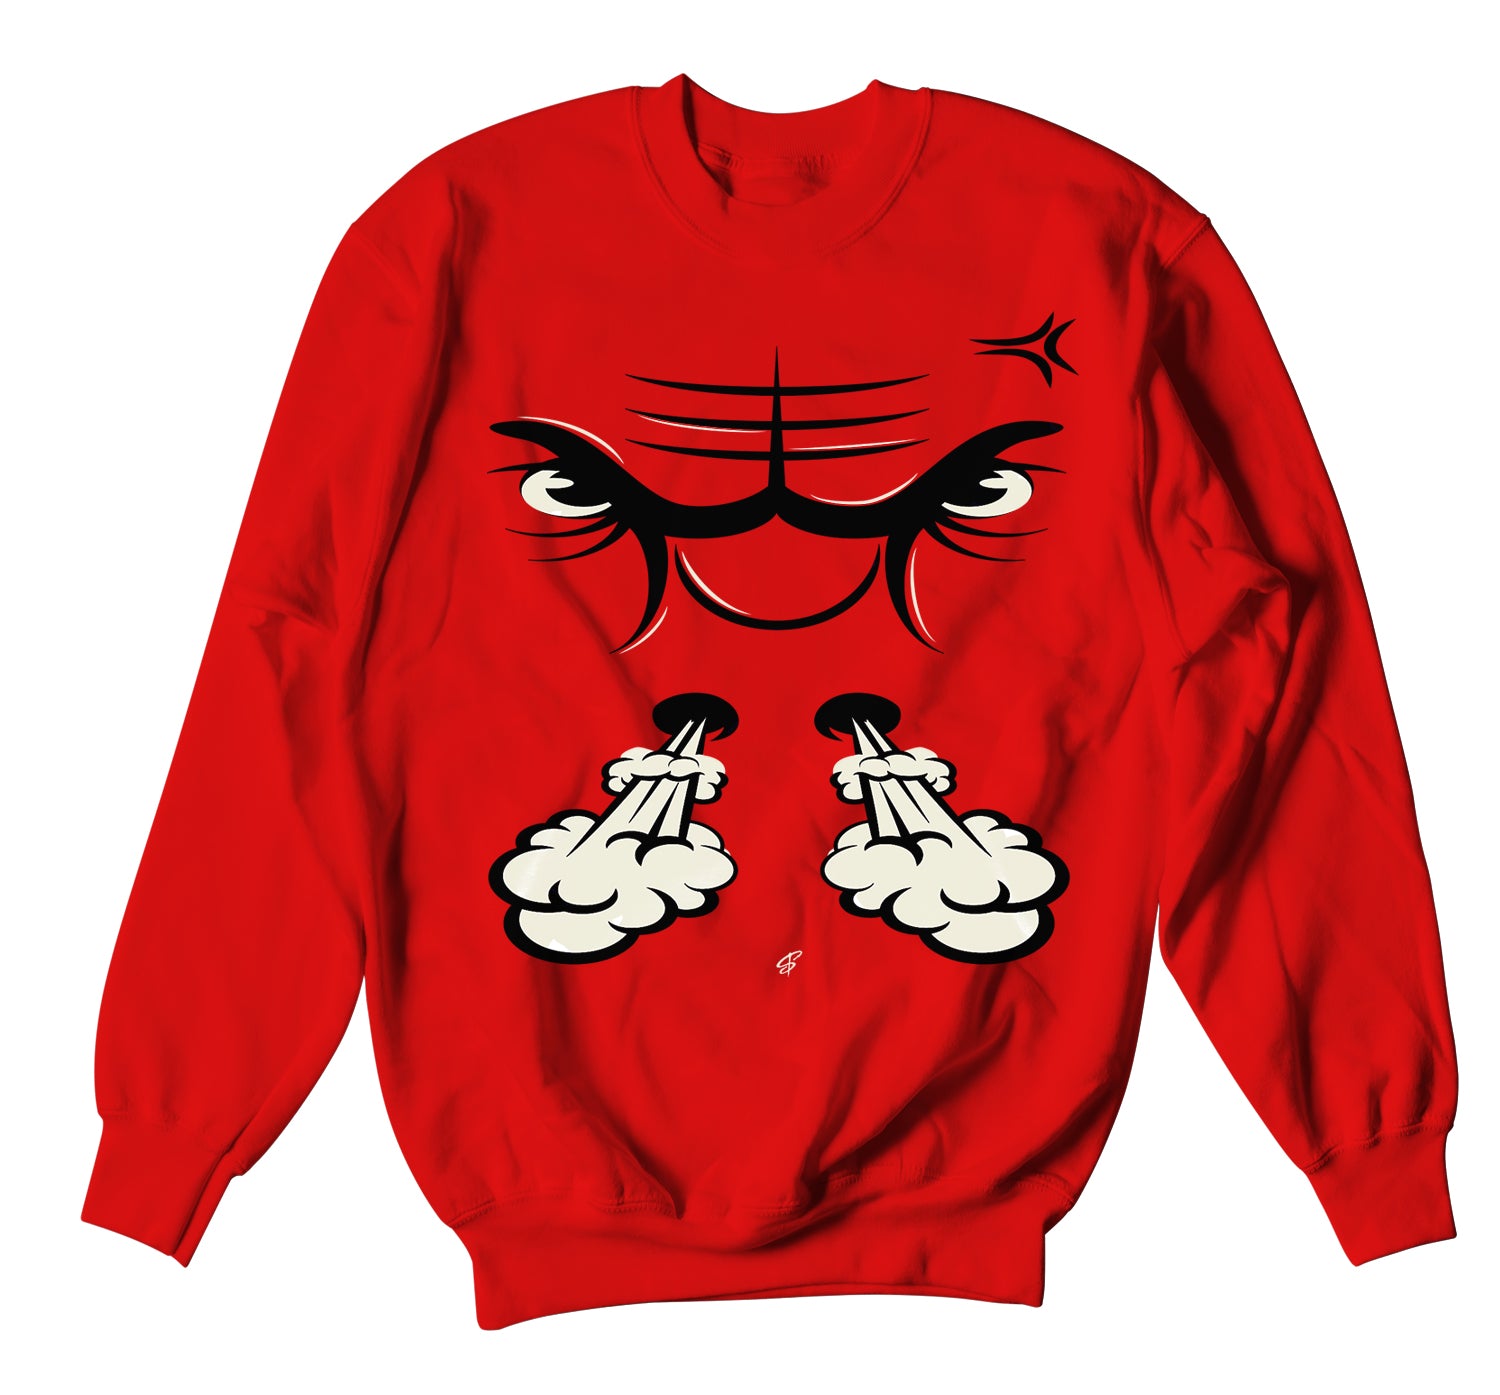 Retro 3 Red Cement Sweater - Raging Face - Red